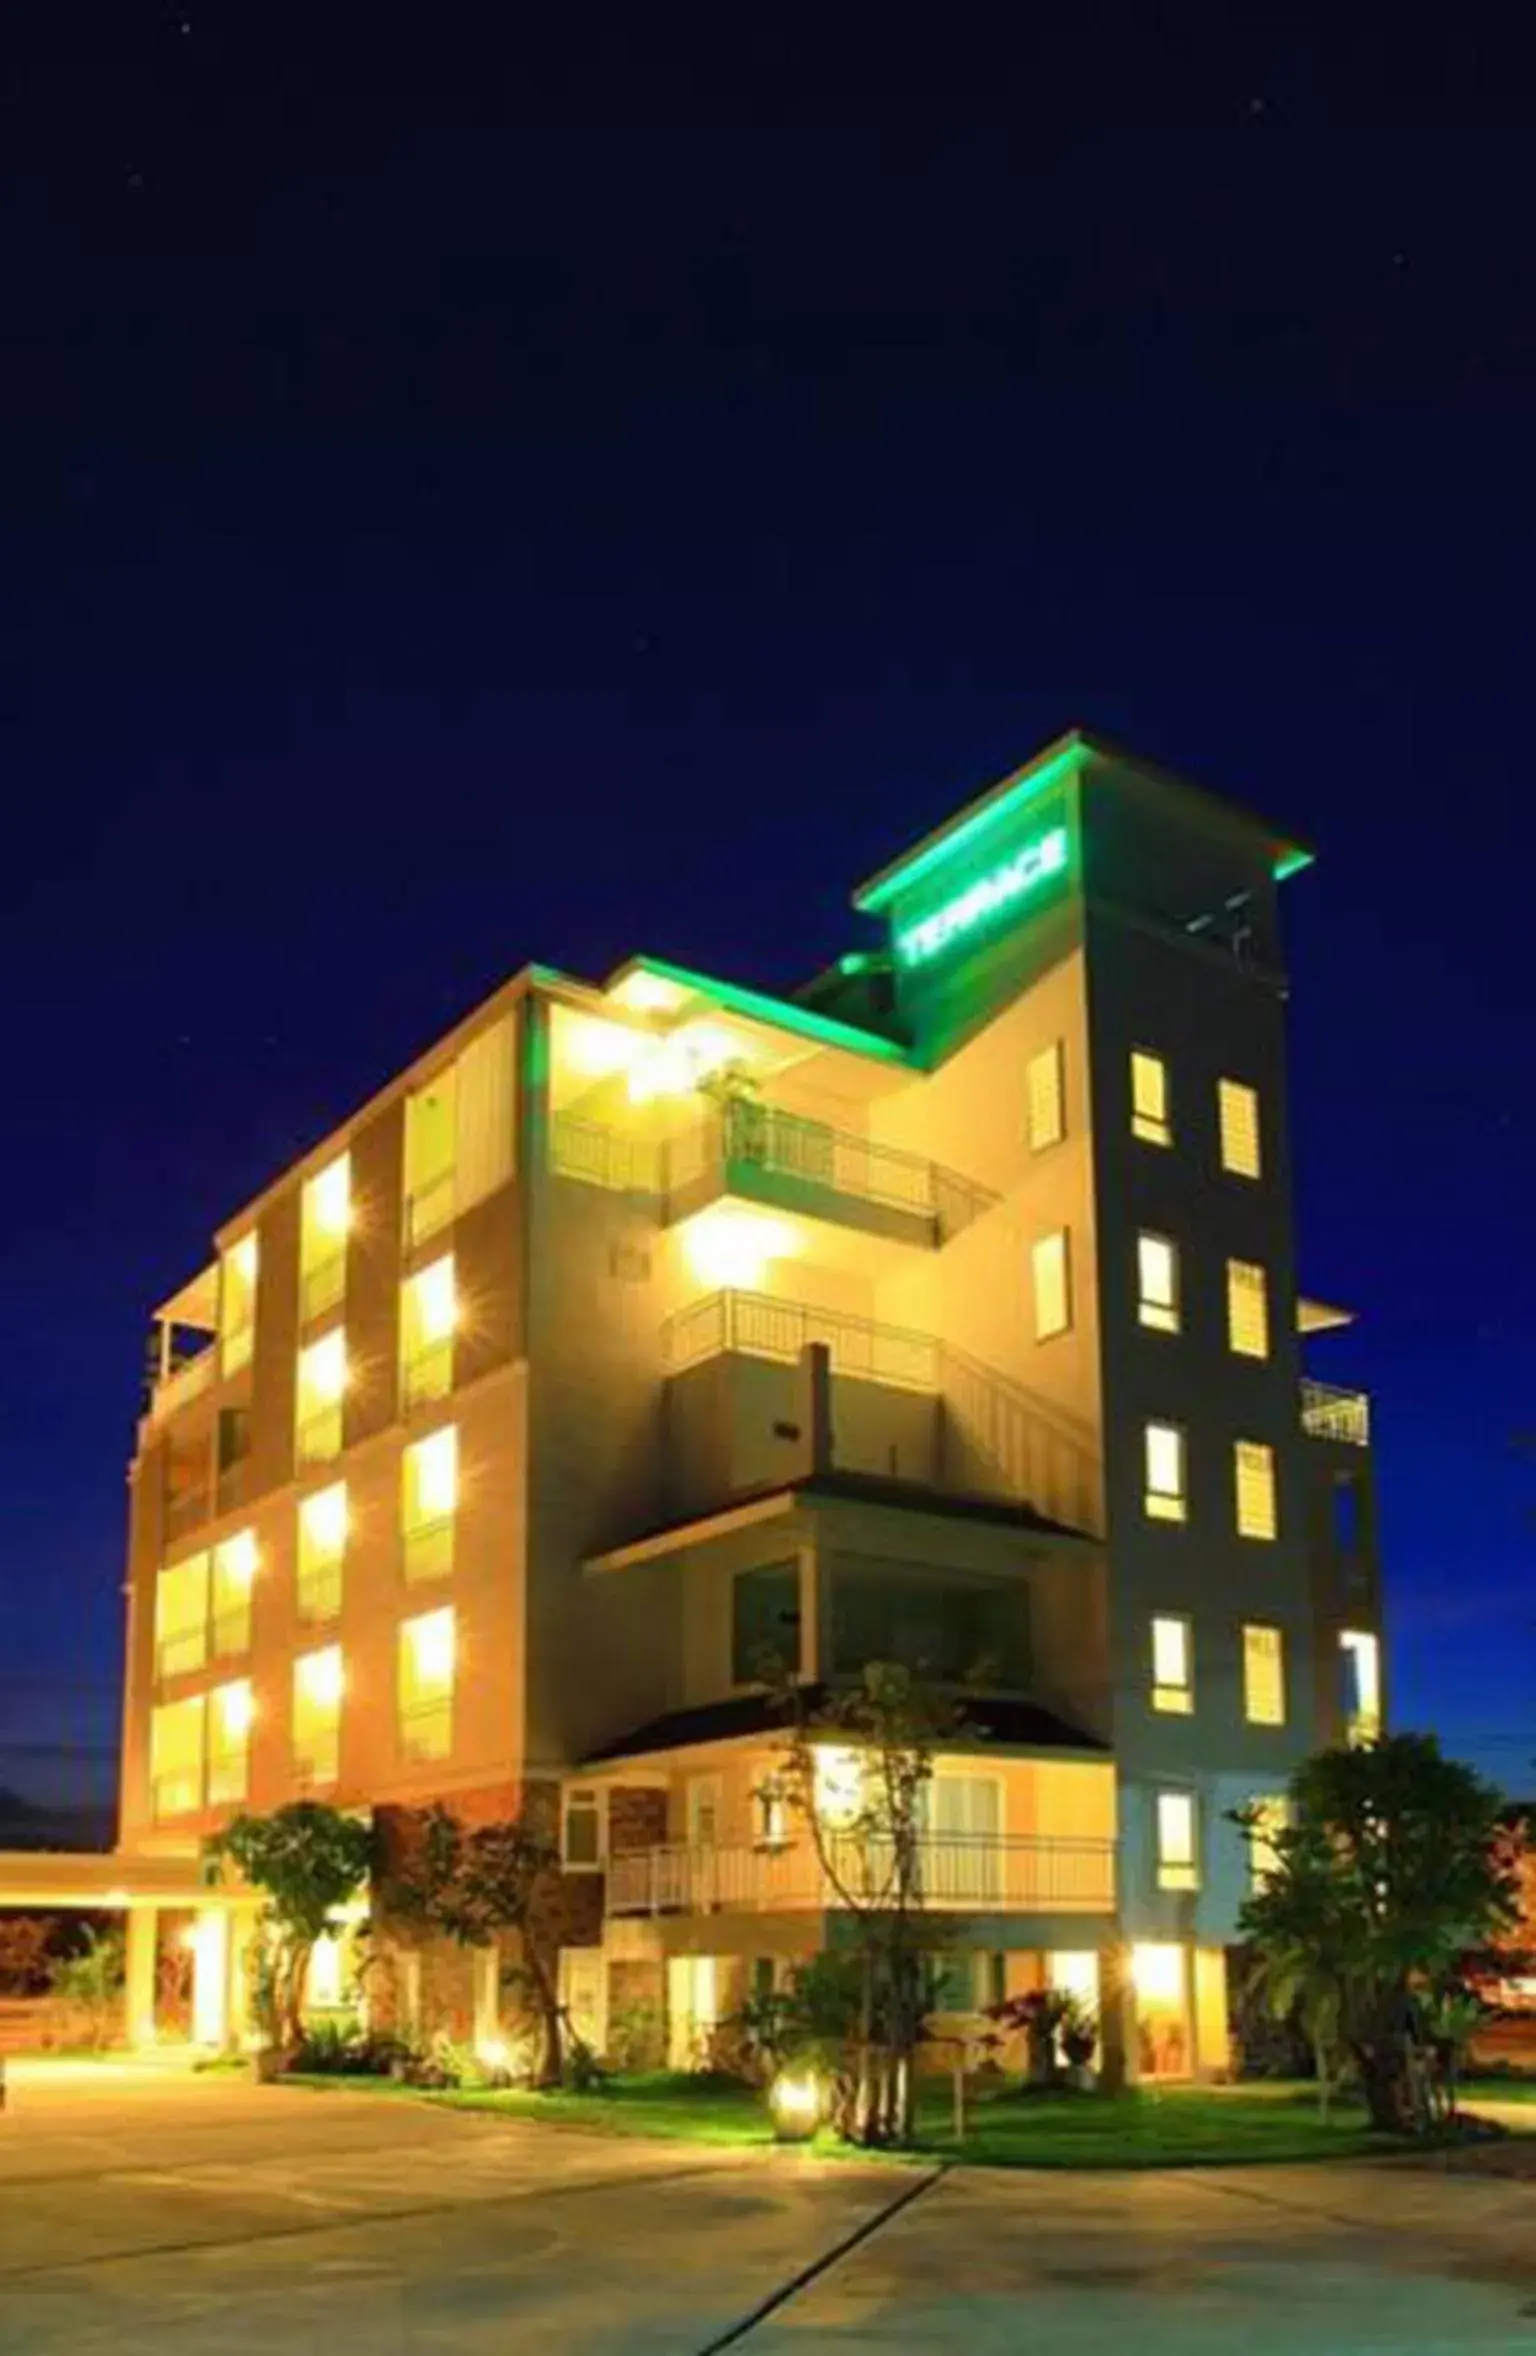 Night, Property Building in The Terrace Hotel